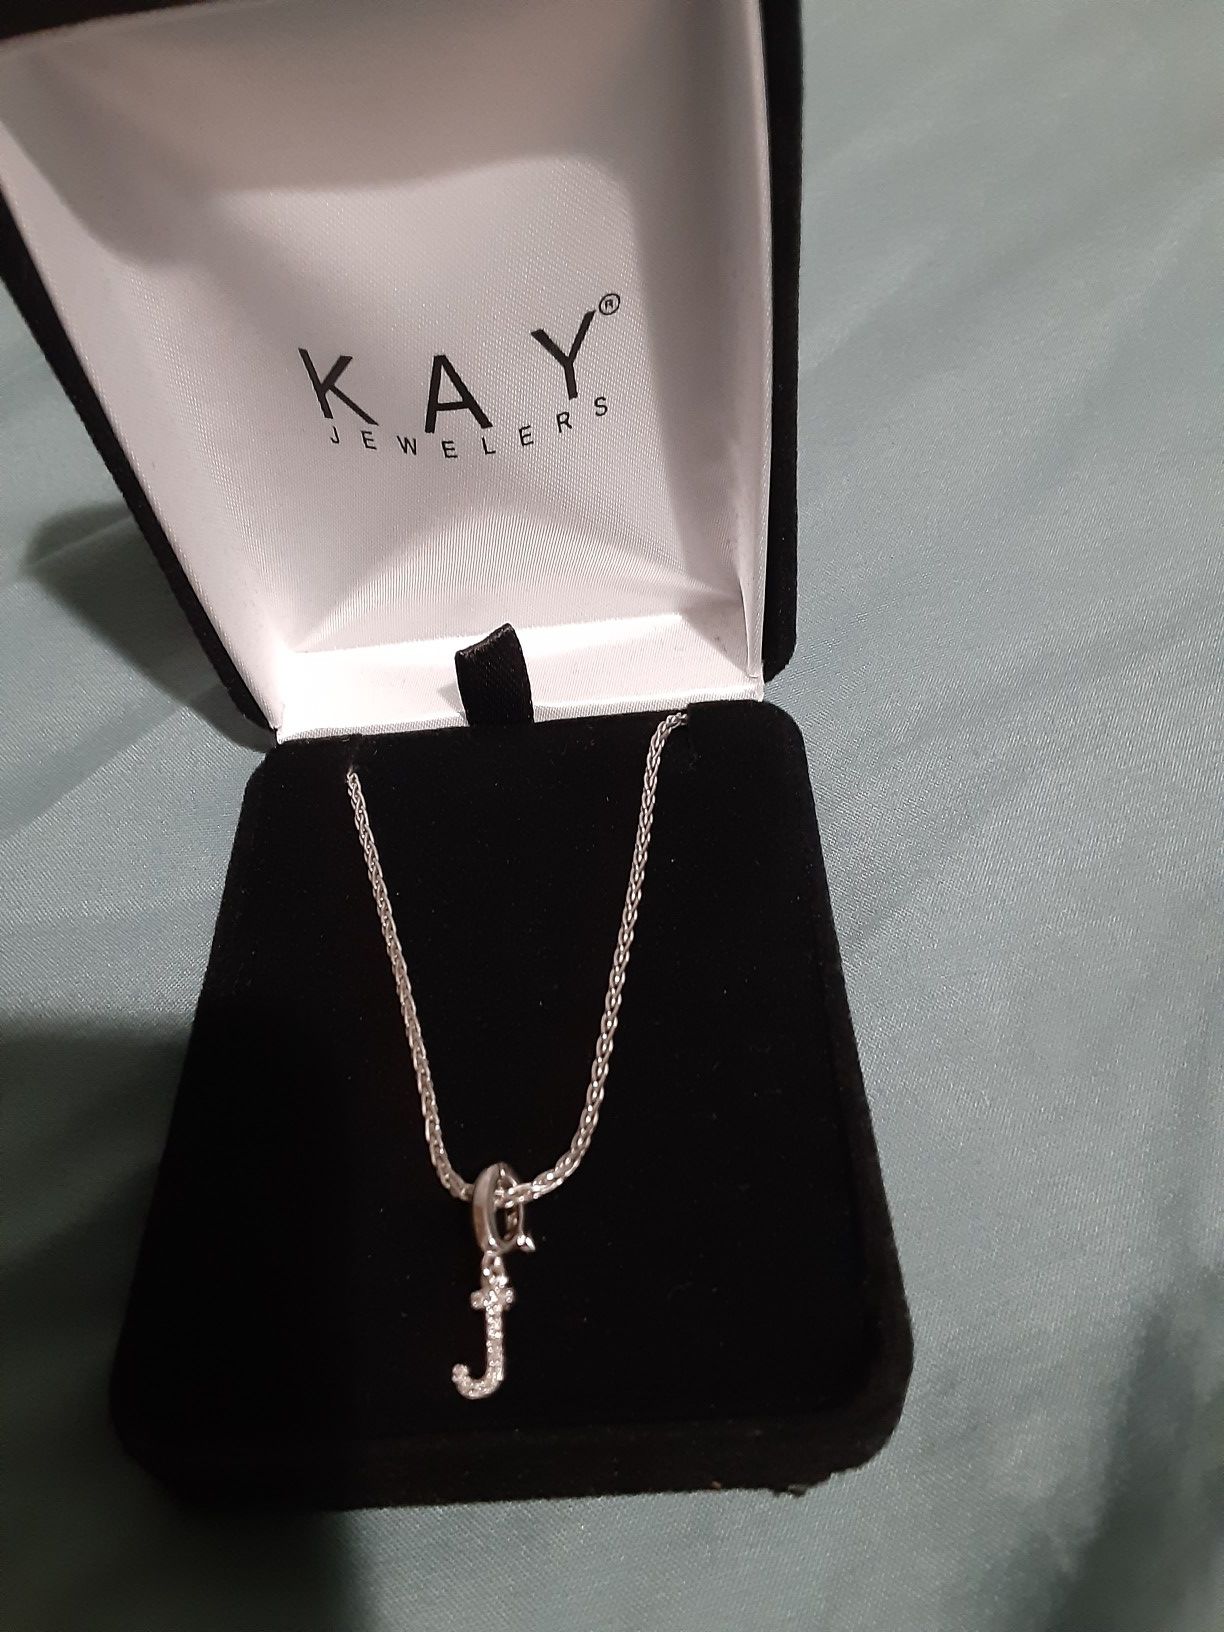 925 sterling silver from Kay Jewelers the diamonds and the J are real